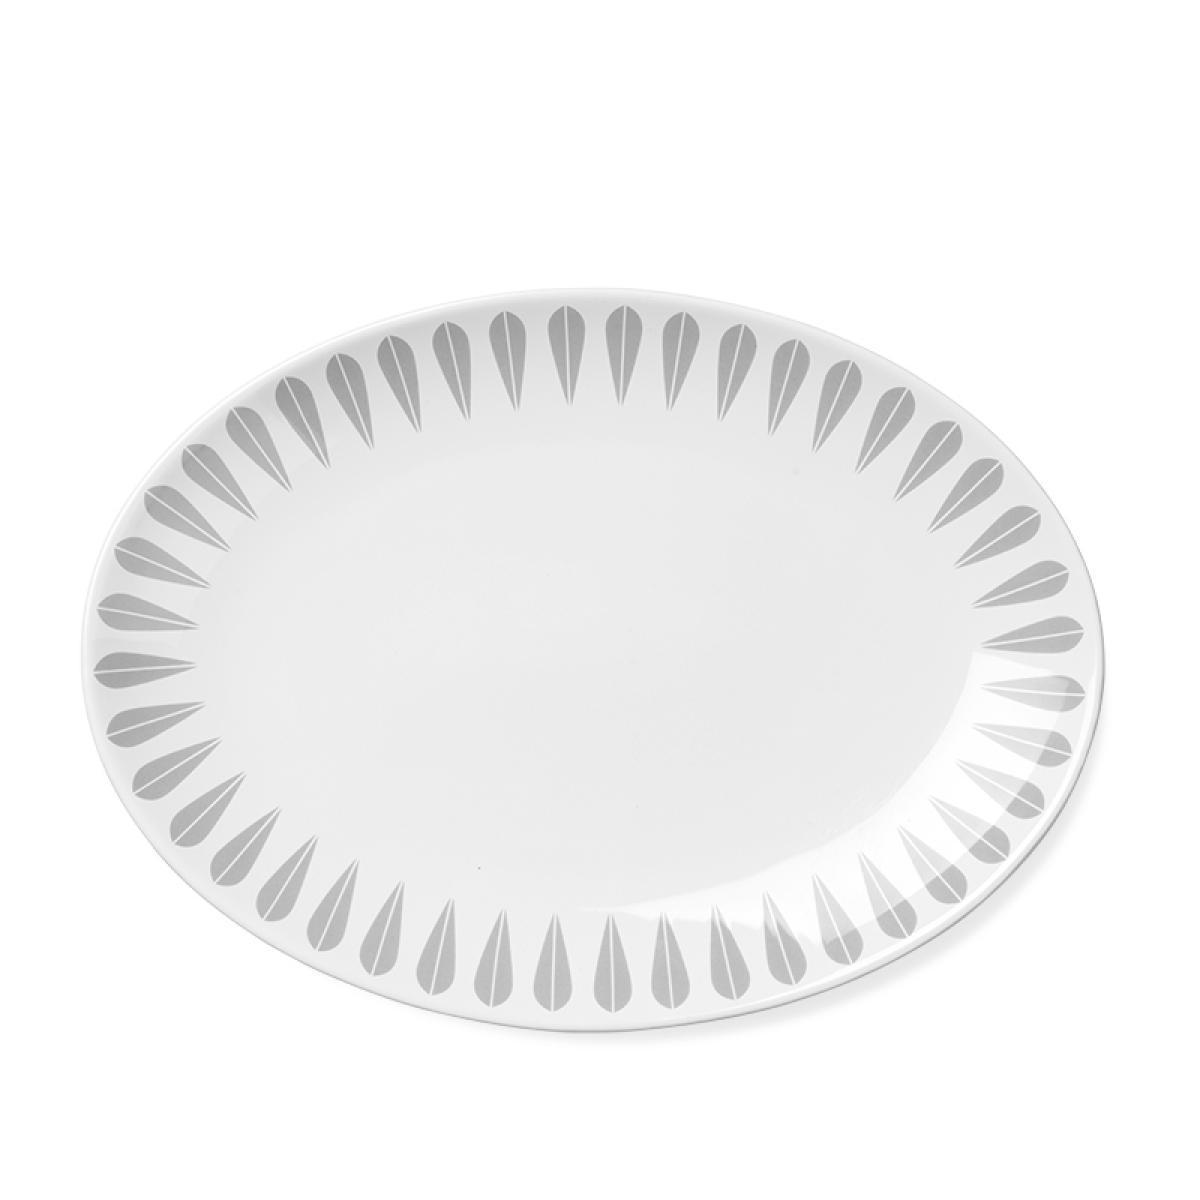 Lucie Kaas Collection Arne Clausen Service Plate Grey, 34 cm